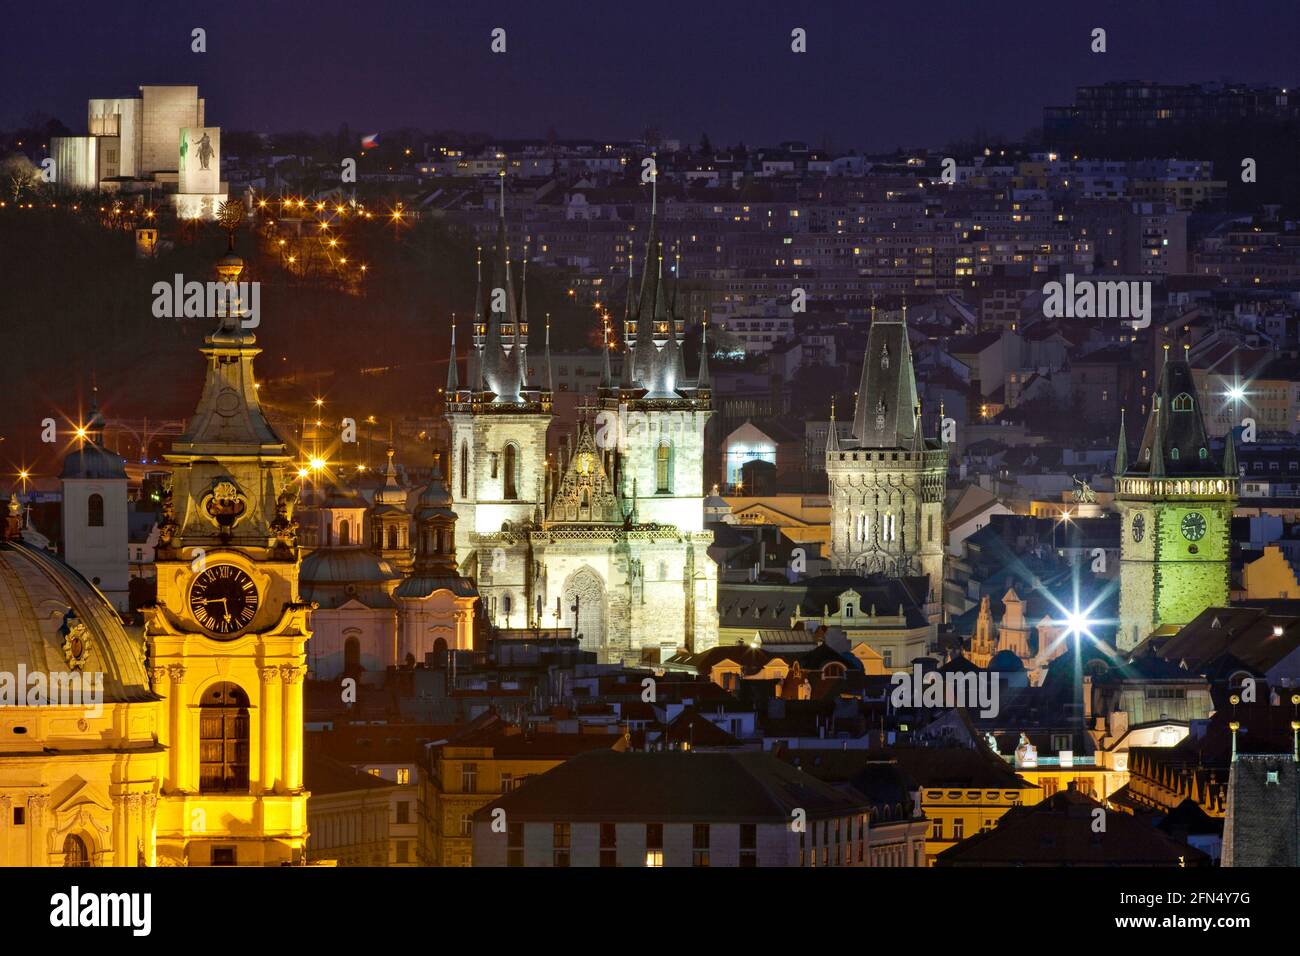 Prague, Czechia - Spires and churches of Old town at dusk. Stock Photo